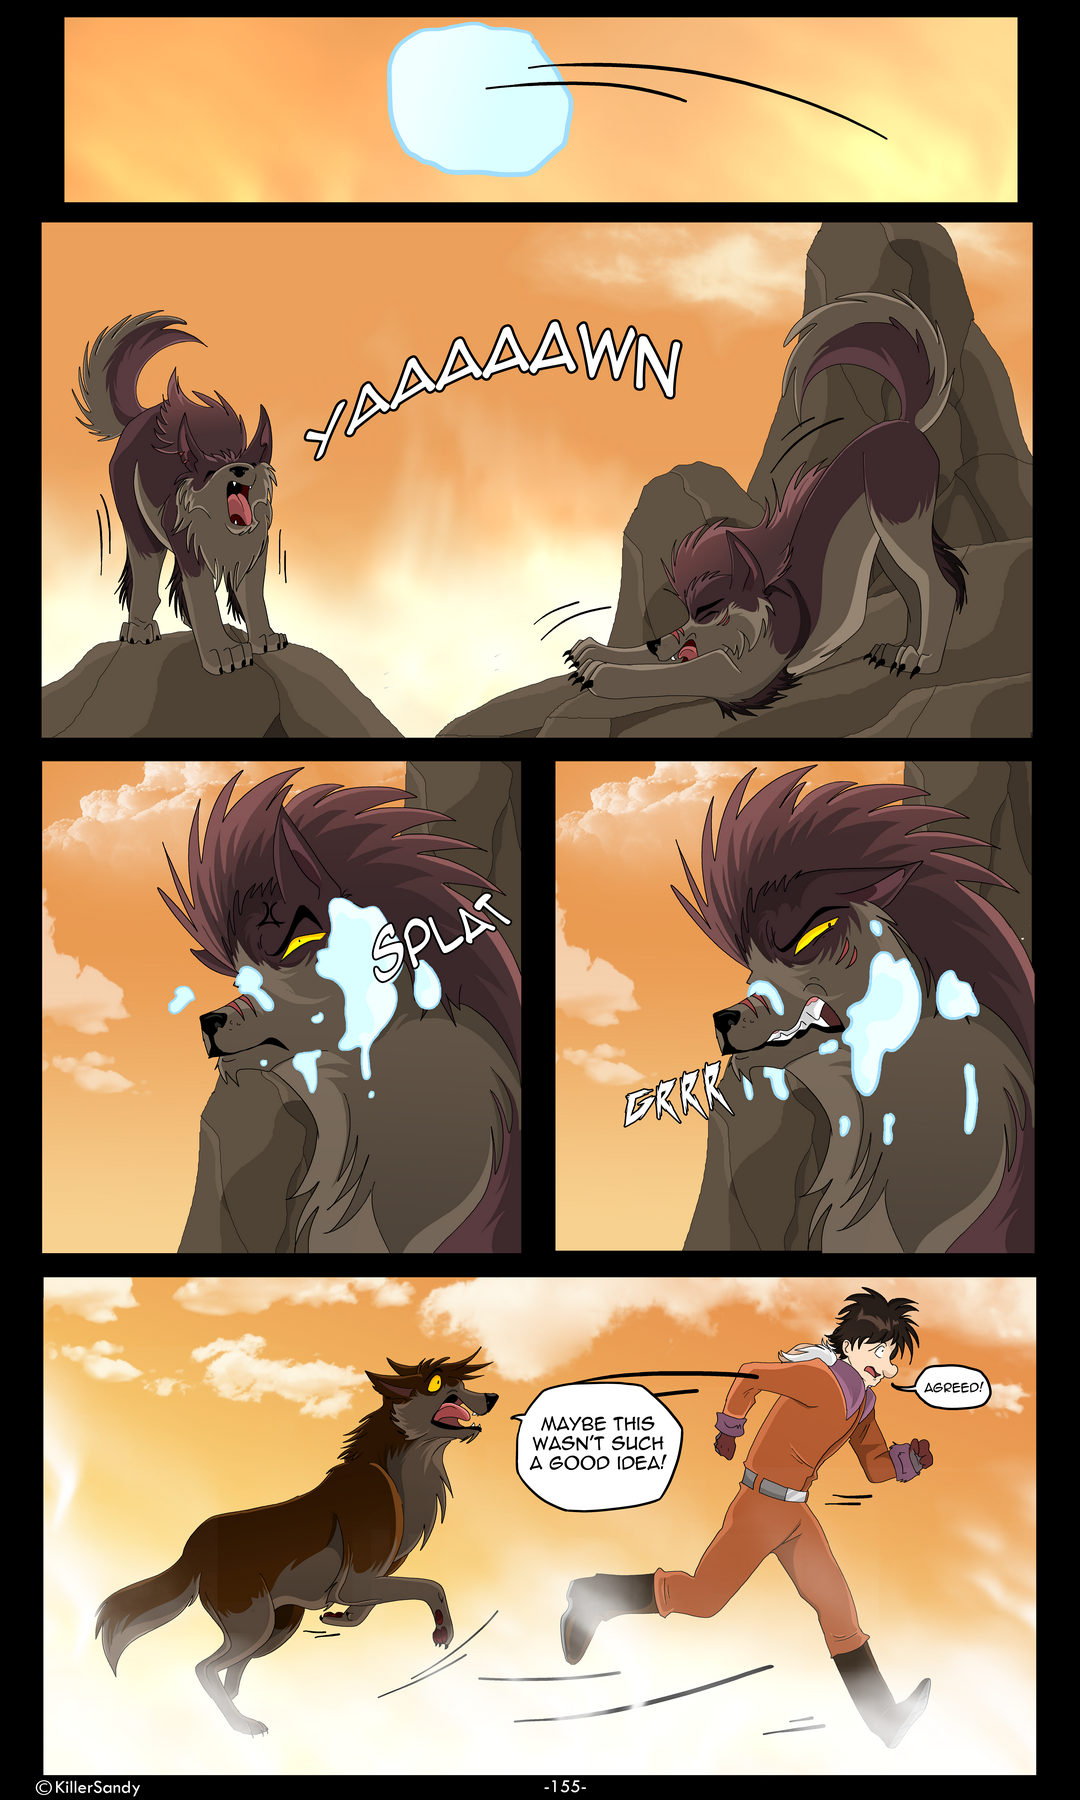 The Prince of the Moonlight Stone page 155